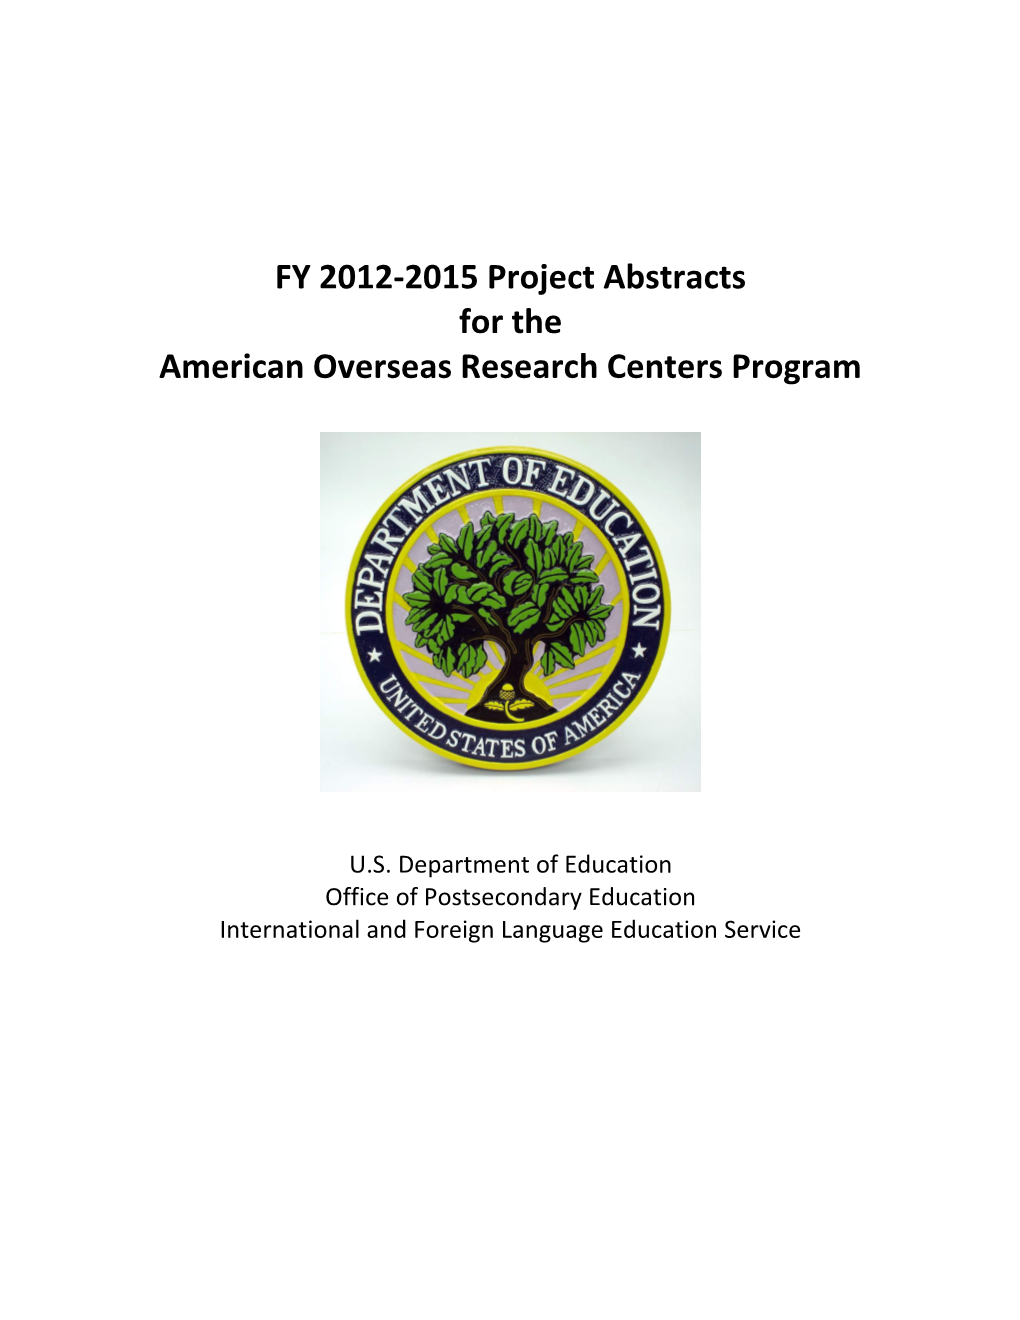 FY 2012-2015 Project Abstracts for the American Overseas Research Centers Program (MS Word)